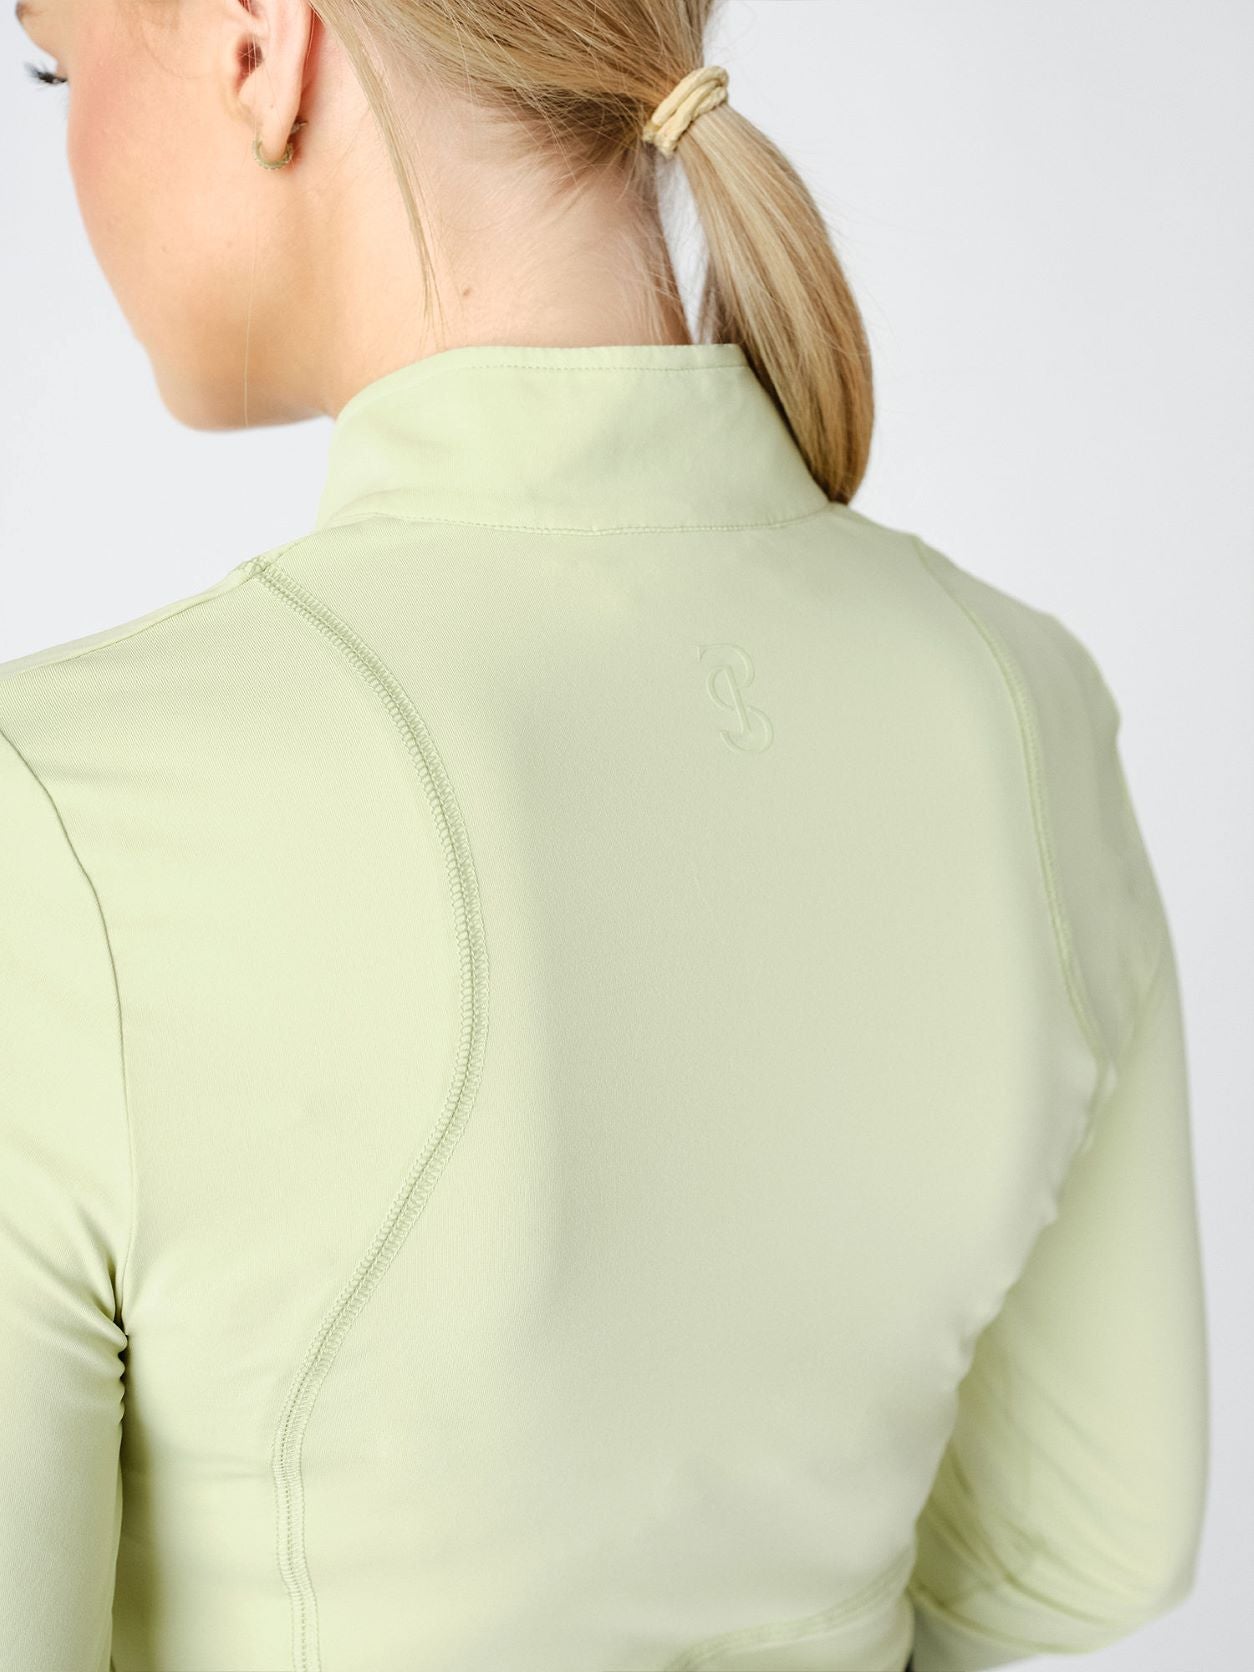 PSOS Adele L/S Base Layer, Seed Green